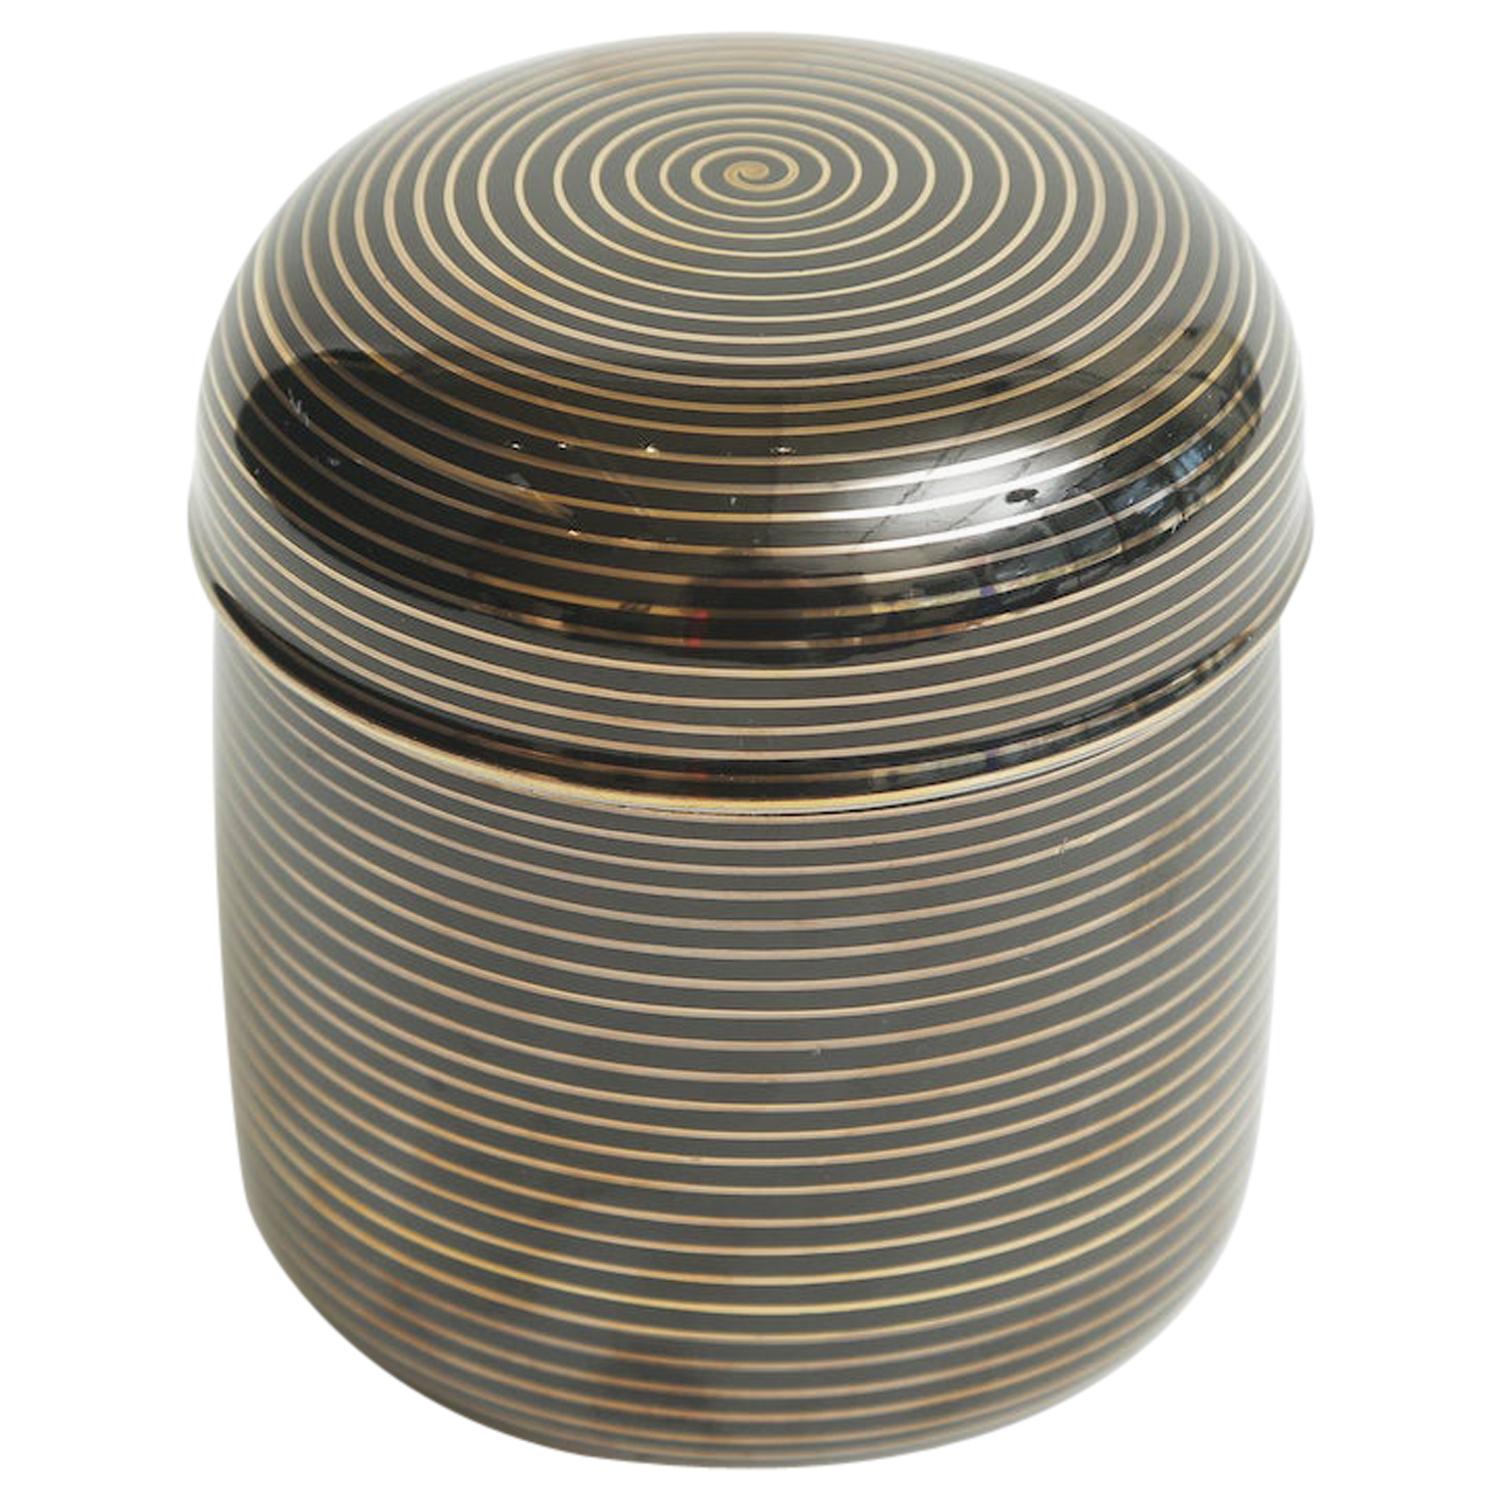 Round Black and Gold Lidded Porcelain Box